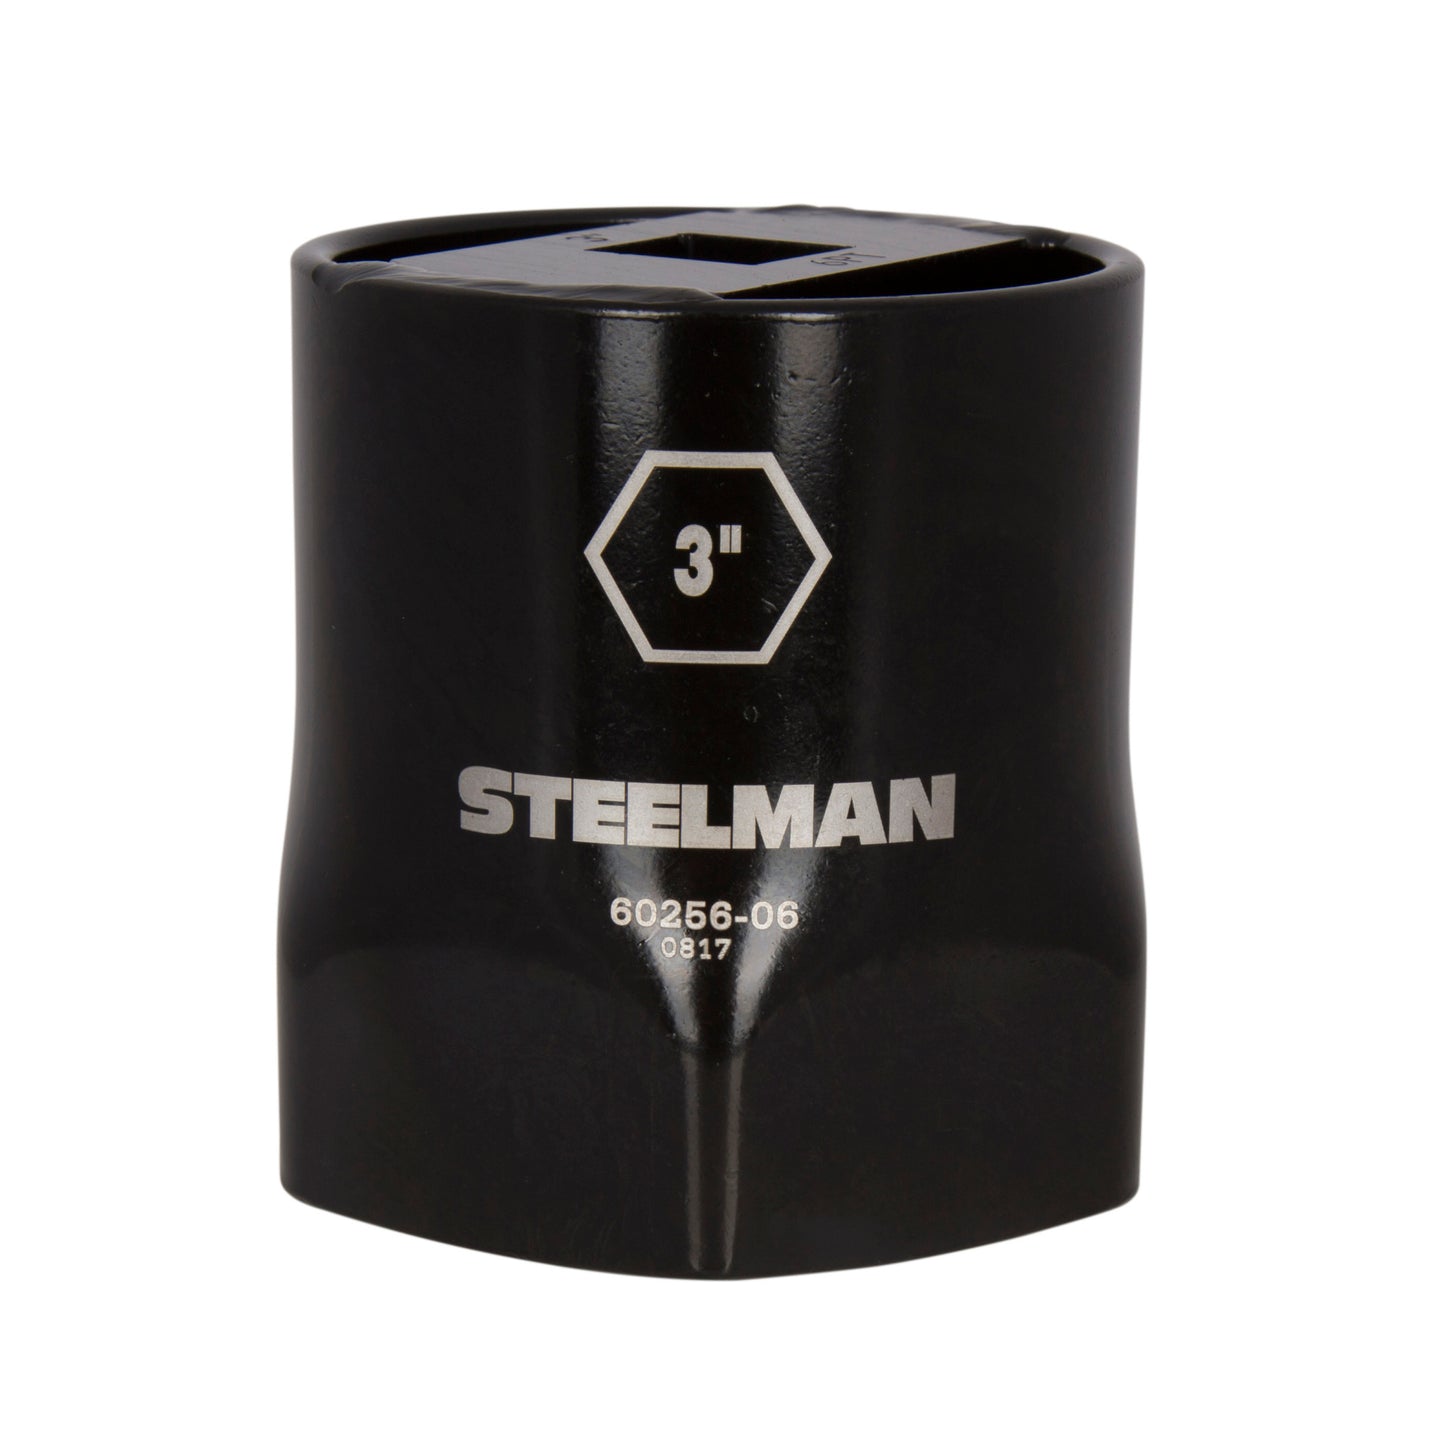 The STEELMAN 3-inch 6-Point Locknut Socket is designed in a 6-point style that grips the sides of fasteners instead of the corners to reduce wear and rounding. Carbon steel with industrial-strength black powder coat and laser etched callouts.